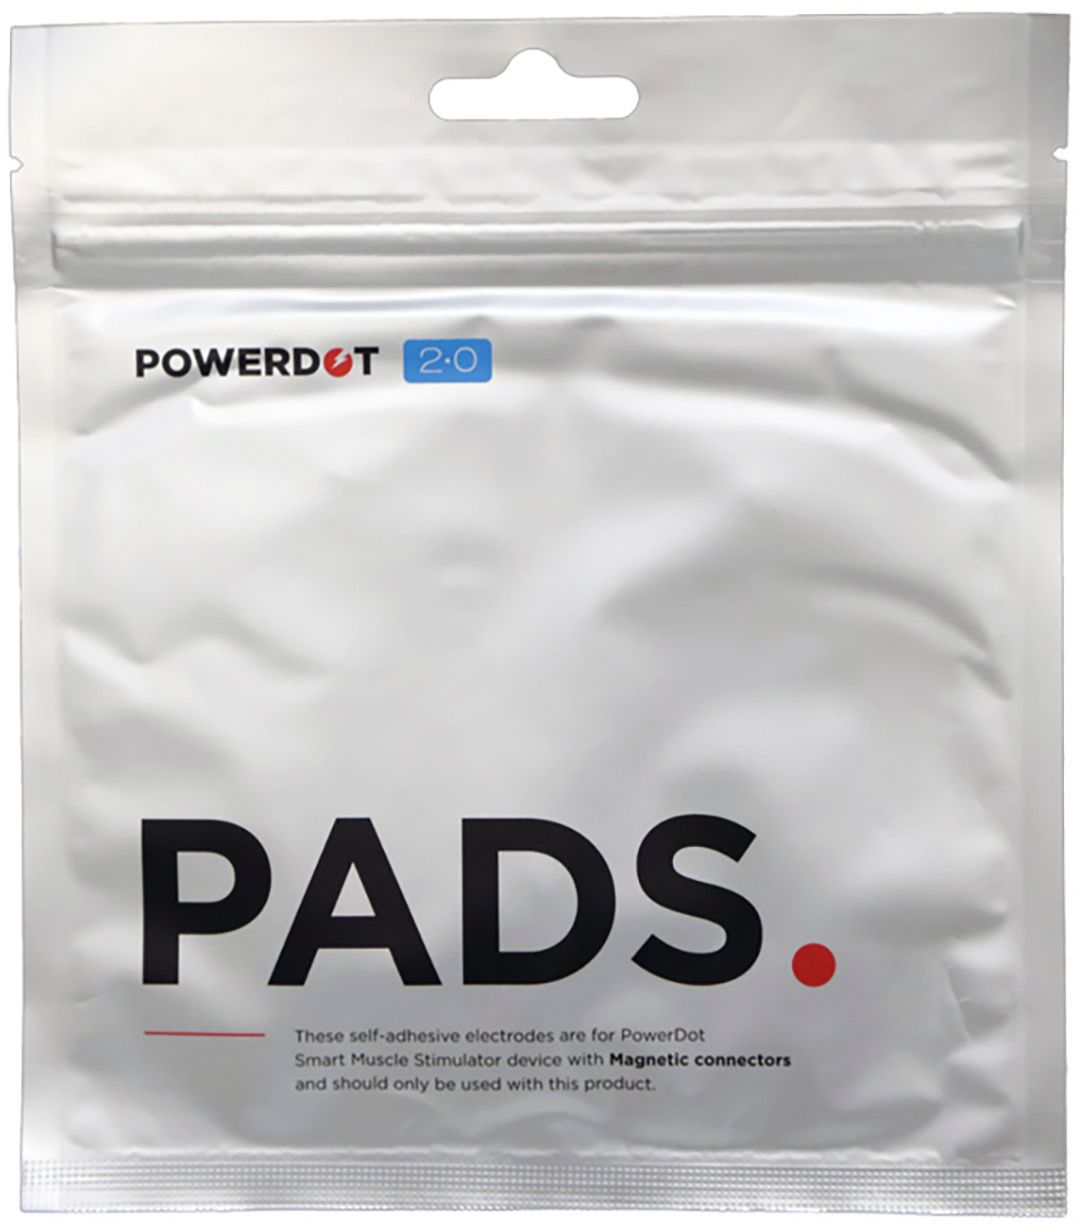 Where to Place TENS Pads for Best Results - Best Buy